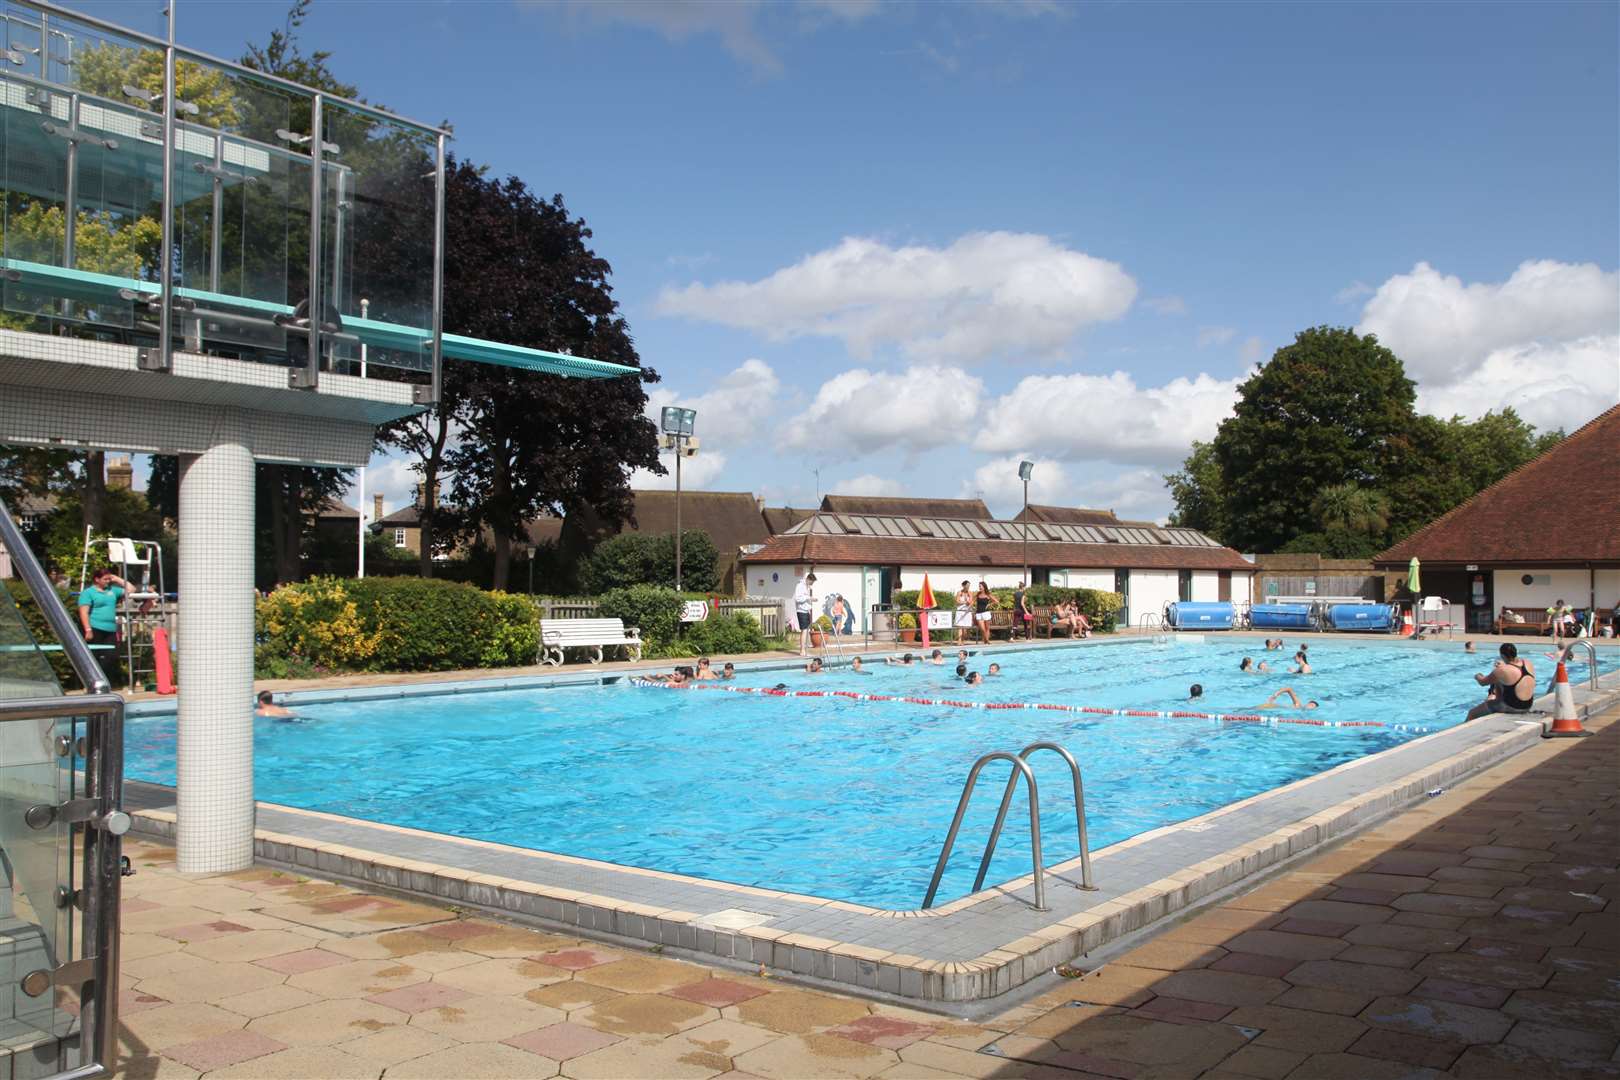 Parents who take their children for lessons at Faversham swimming pool say the increased parking prices could put people off using the facility